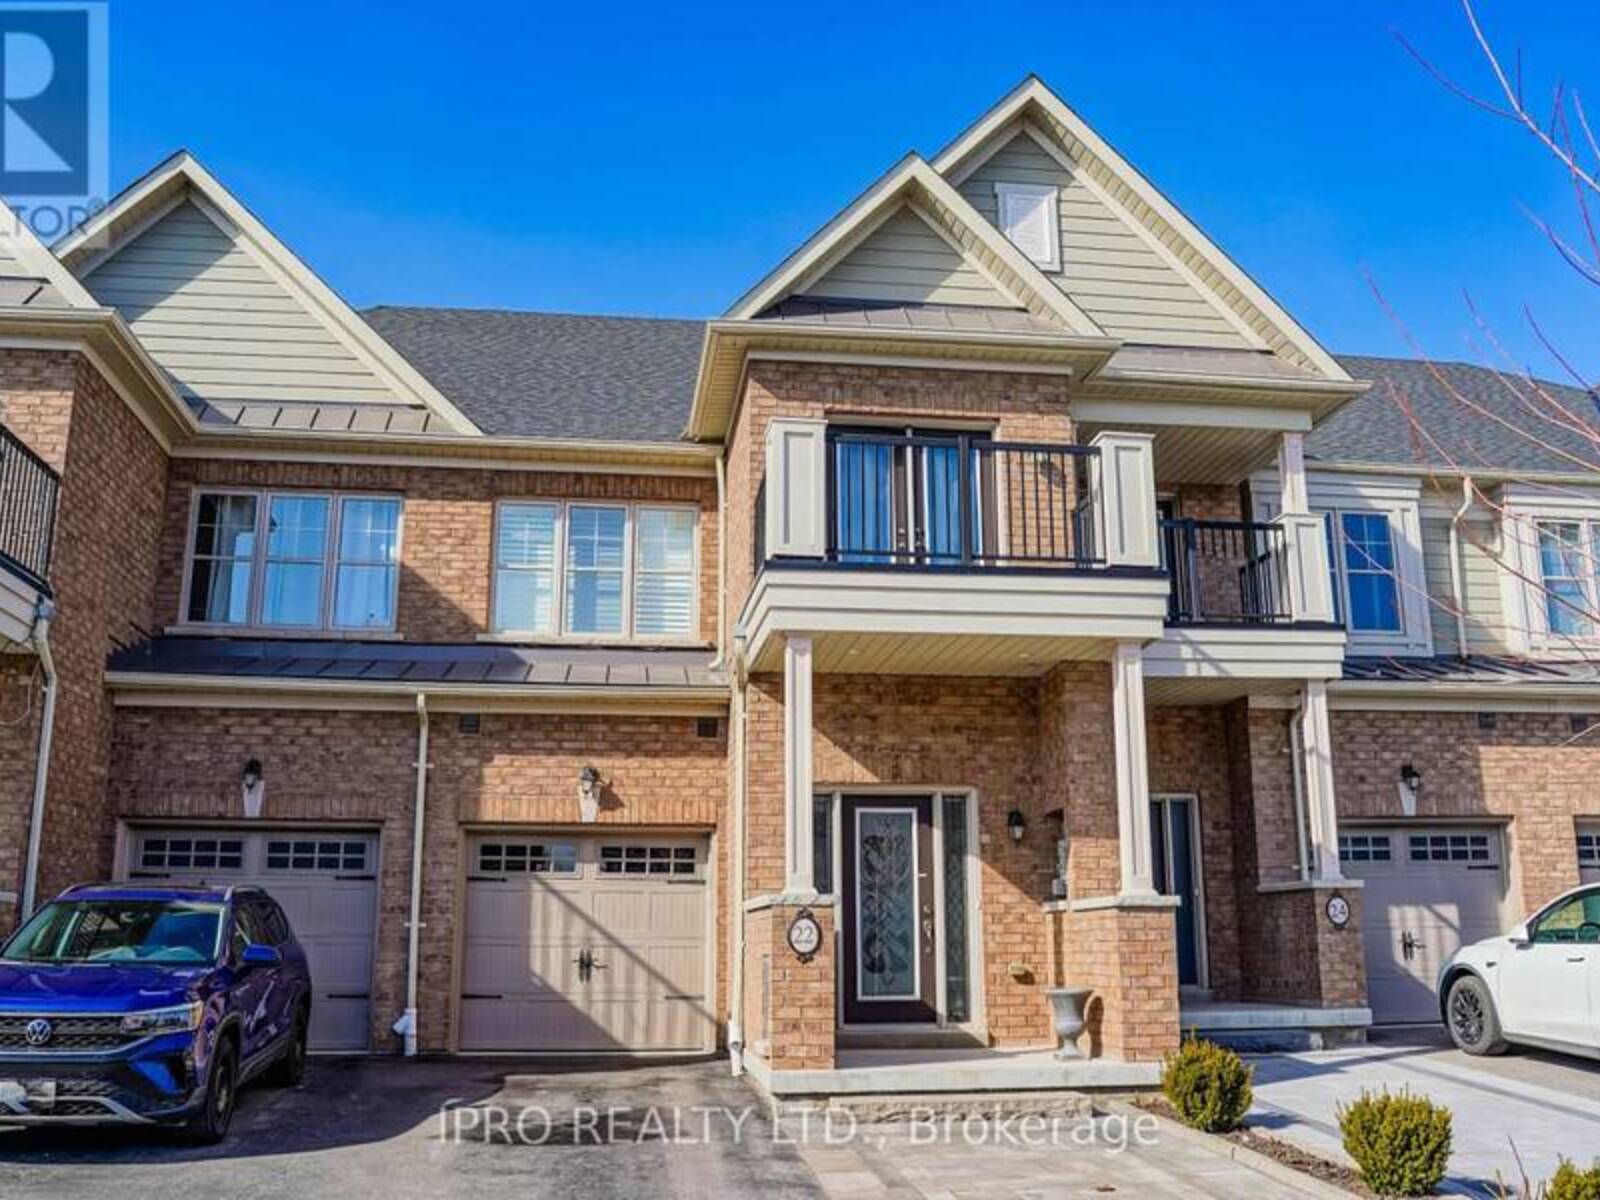 22 SPOFFORD DR, Whitchurch-Stouffville, Ontario L4A 0W5